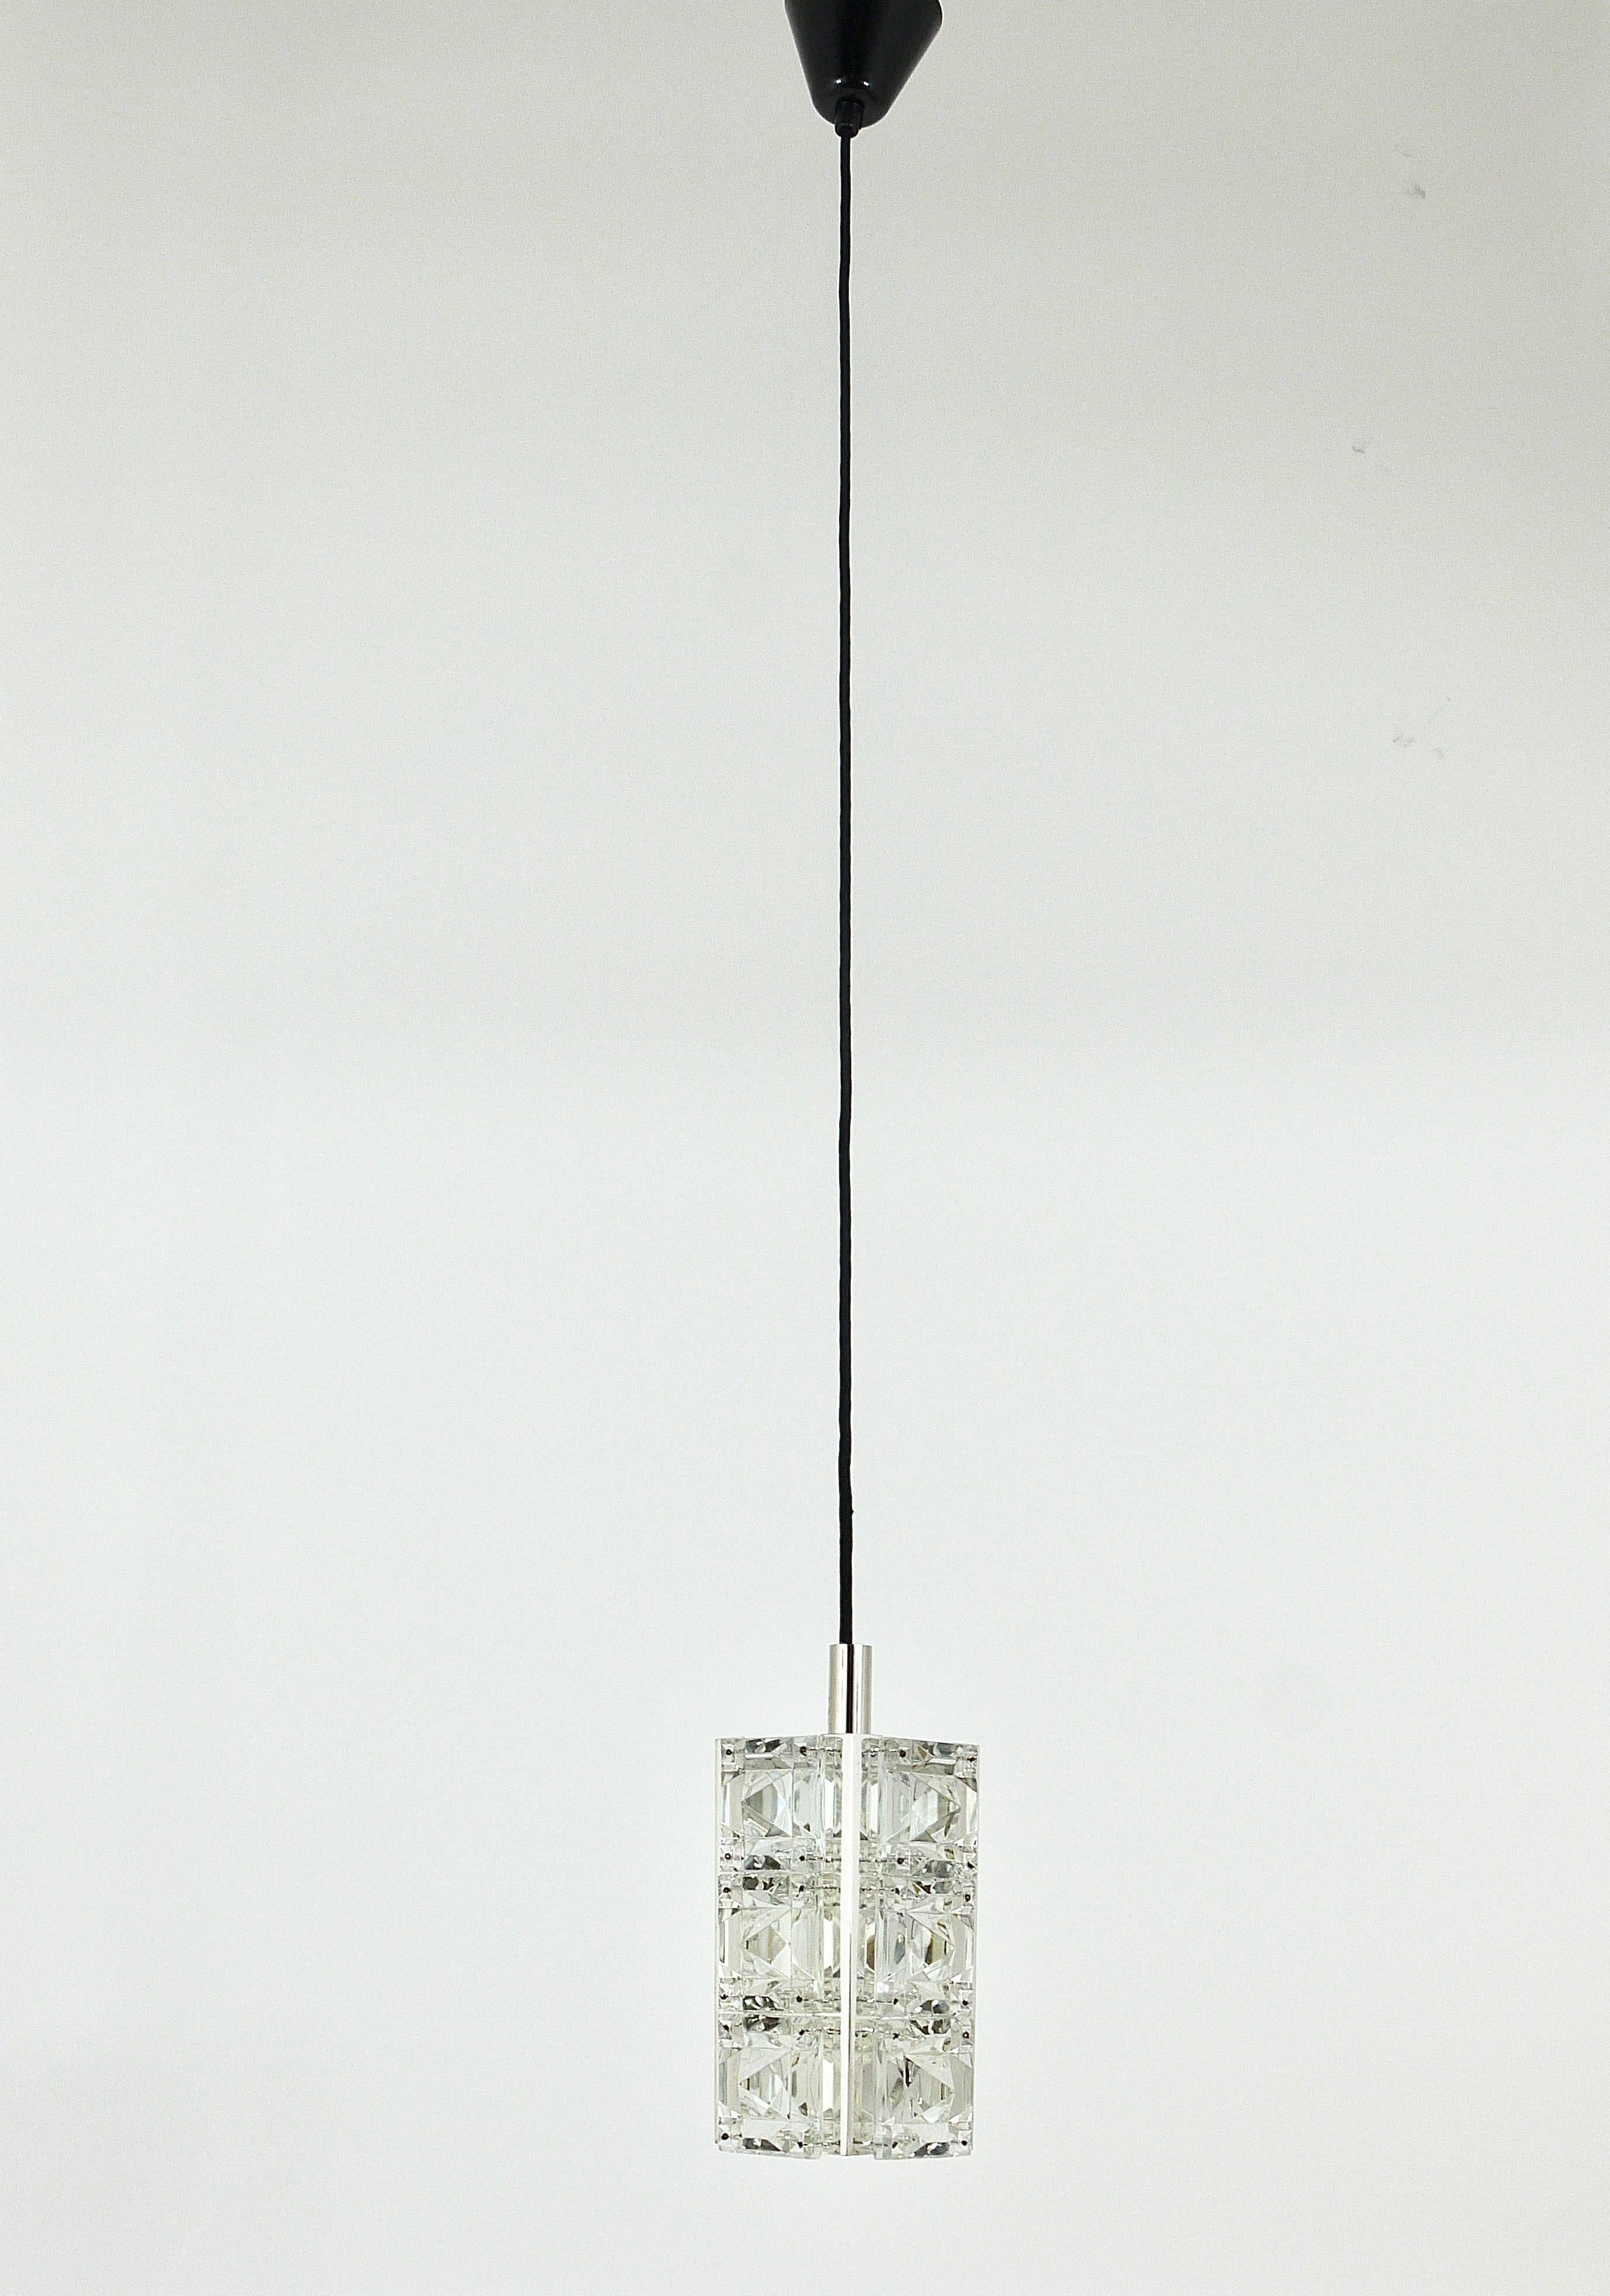 Up to three beautiful square pendant lights from the 1960s, executed by Bakalowits in Austria. Square triangular-faceted glass crystals, mounted on a nickel-plated hardware, each lights has one light-source. Rewired on a black fabric cord. In very